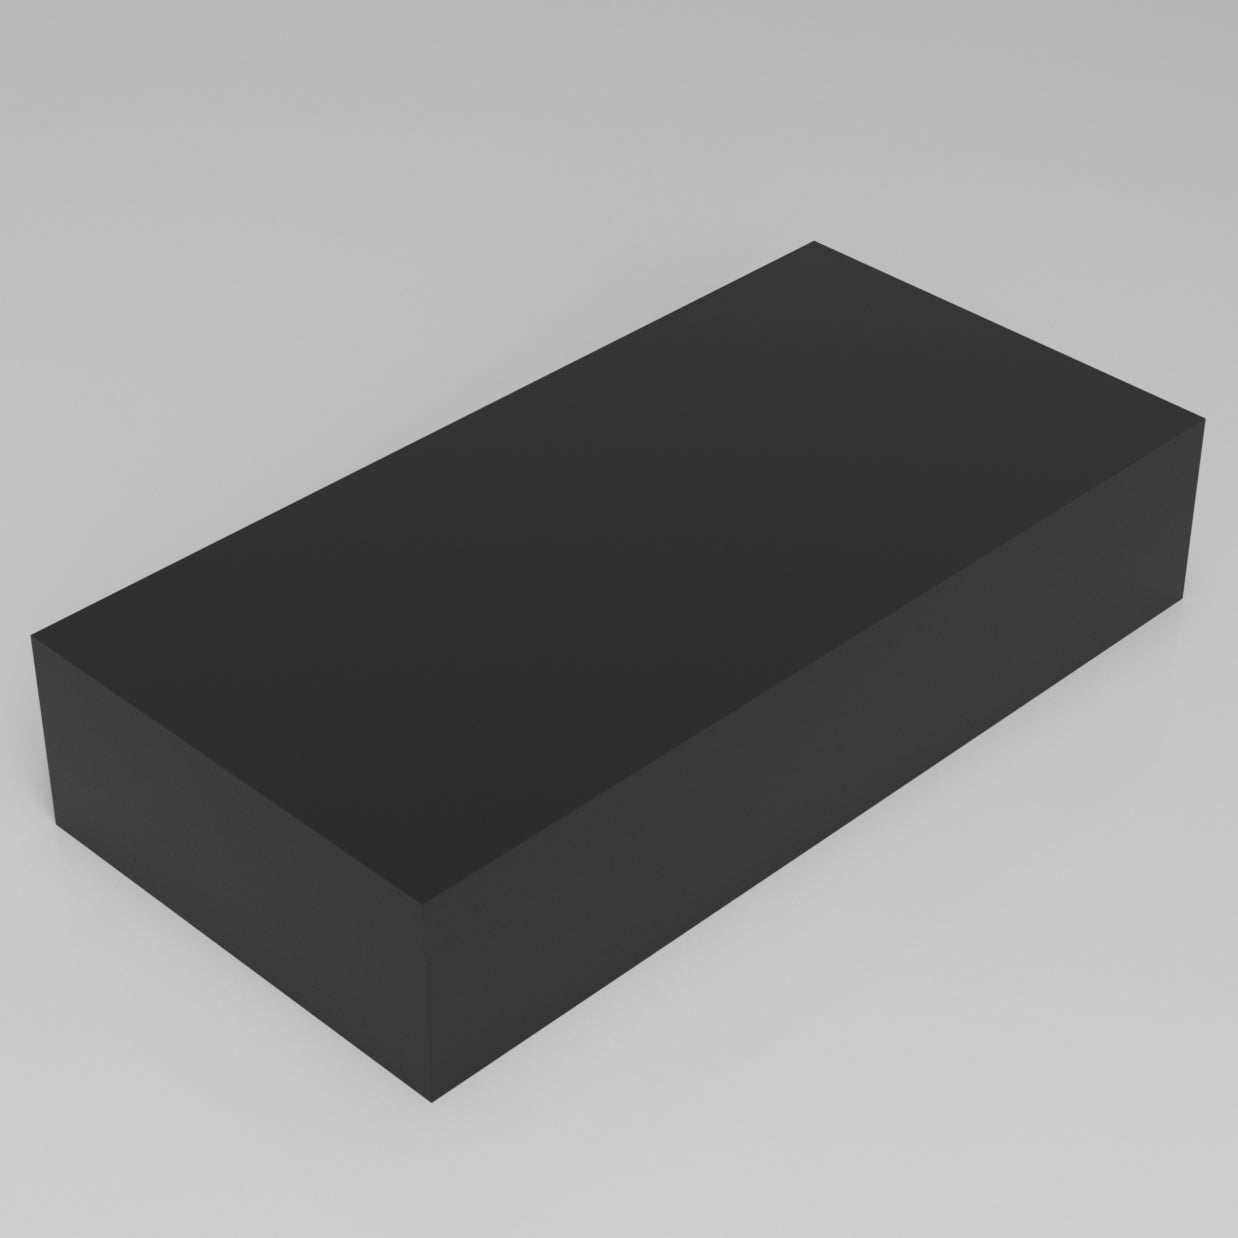 Machinable Wax Rectangular Block Front View 5 Inch by 12 Inch by 24 Inch